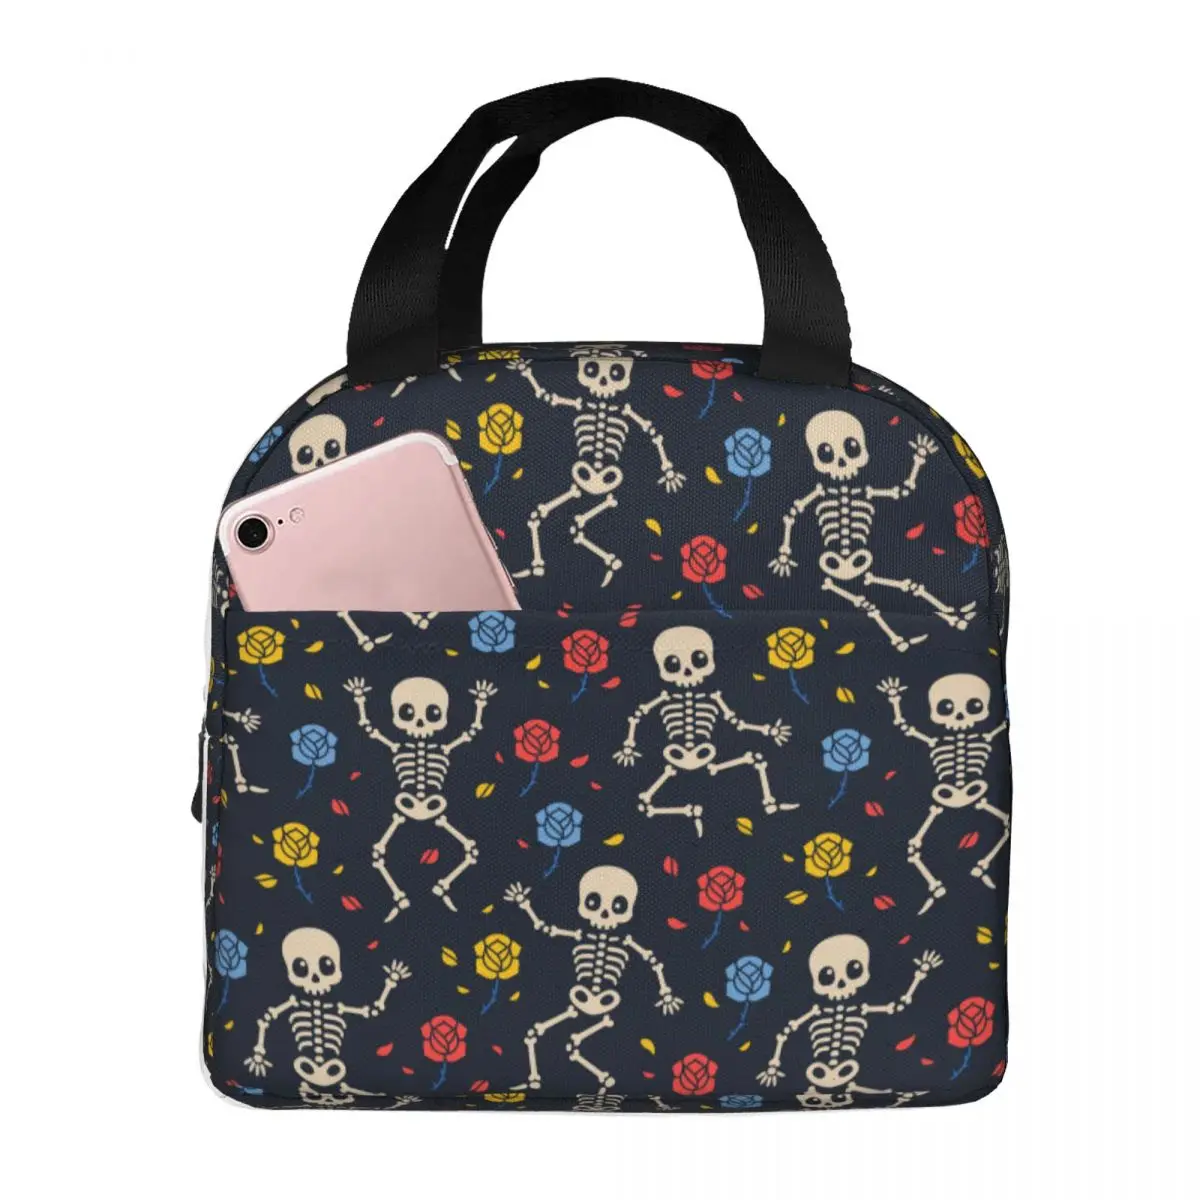 Skeletons And Roses Lunch Bag Waterproof Insulated Oxford Cooler Bags Sugar Skull Thermal Food School Lunch Box for Women Girl